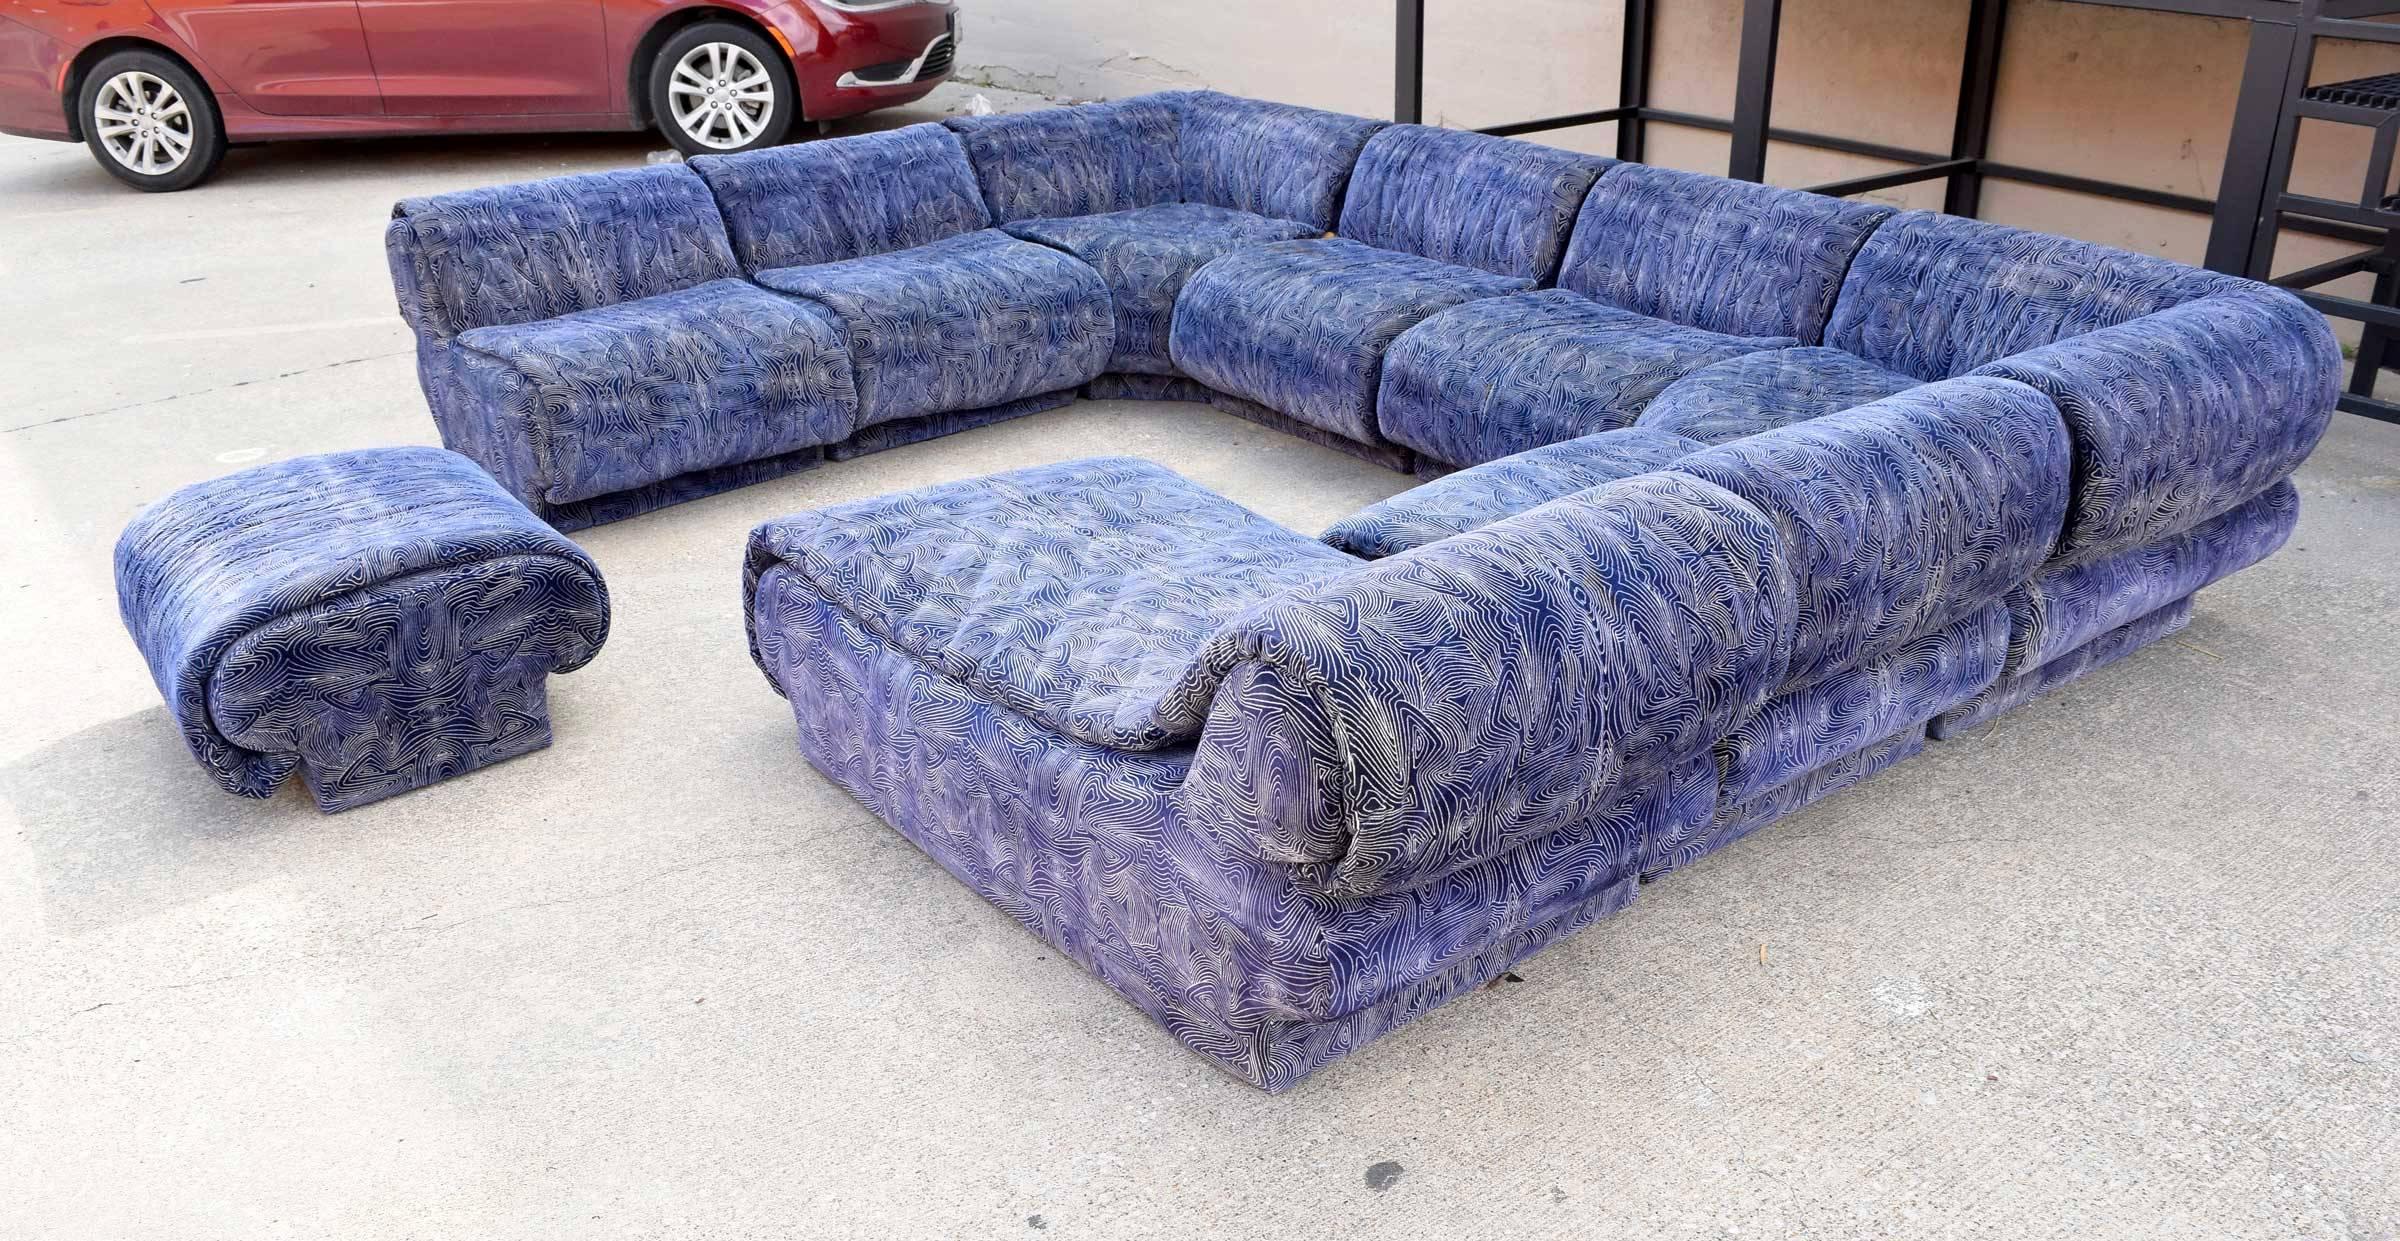 This is a wonderful and comfortable sectional by Preview Furniture Company, in the style of Vladimir Kagan. There are nine pieces which include a chaise and an ottoman. The sofa can be configured in multiple ways. I wish the fabric was cleanable but